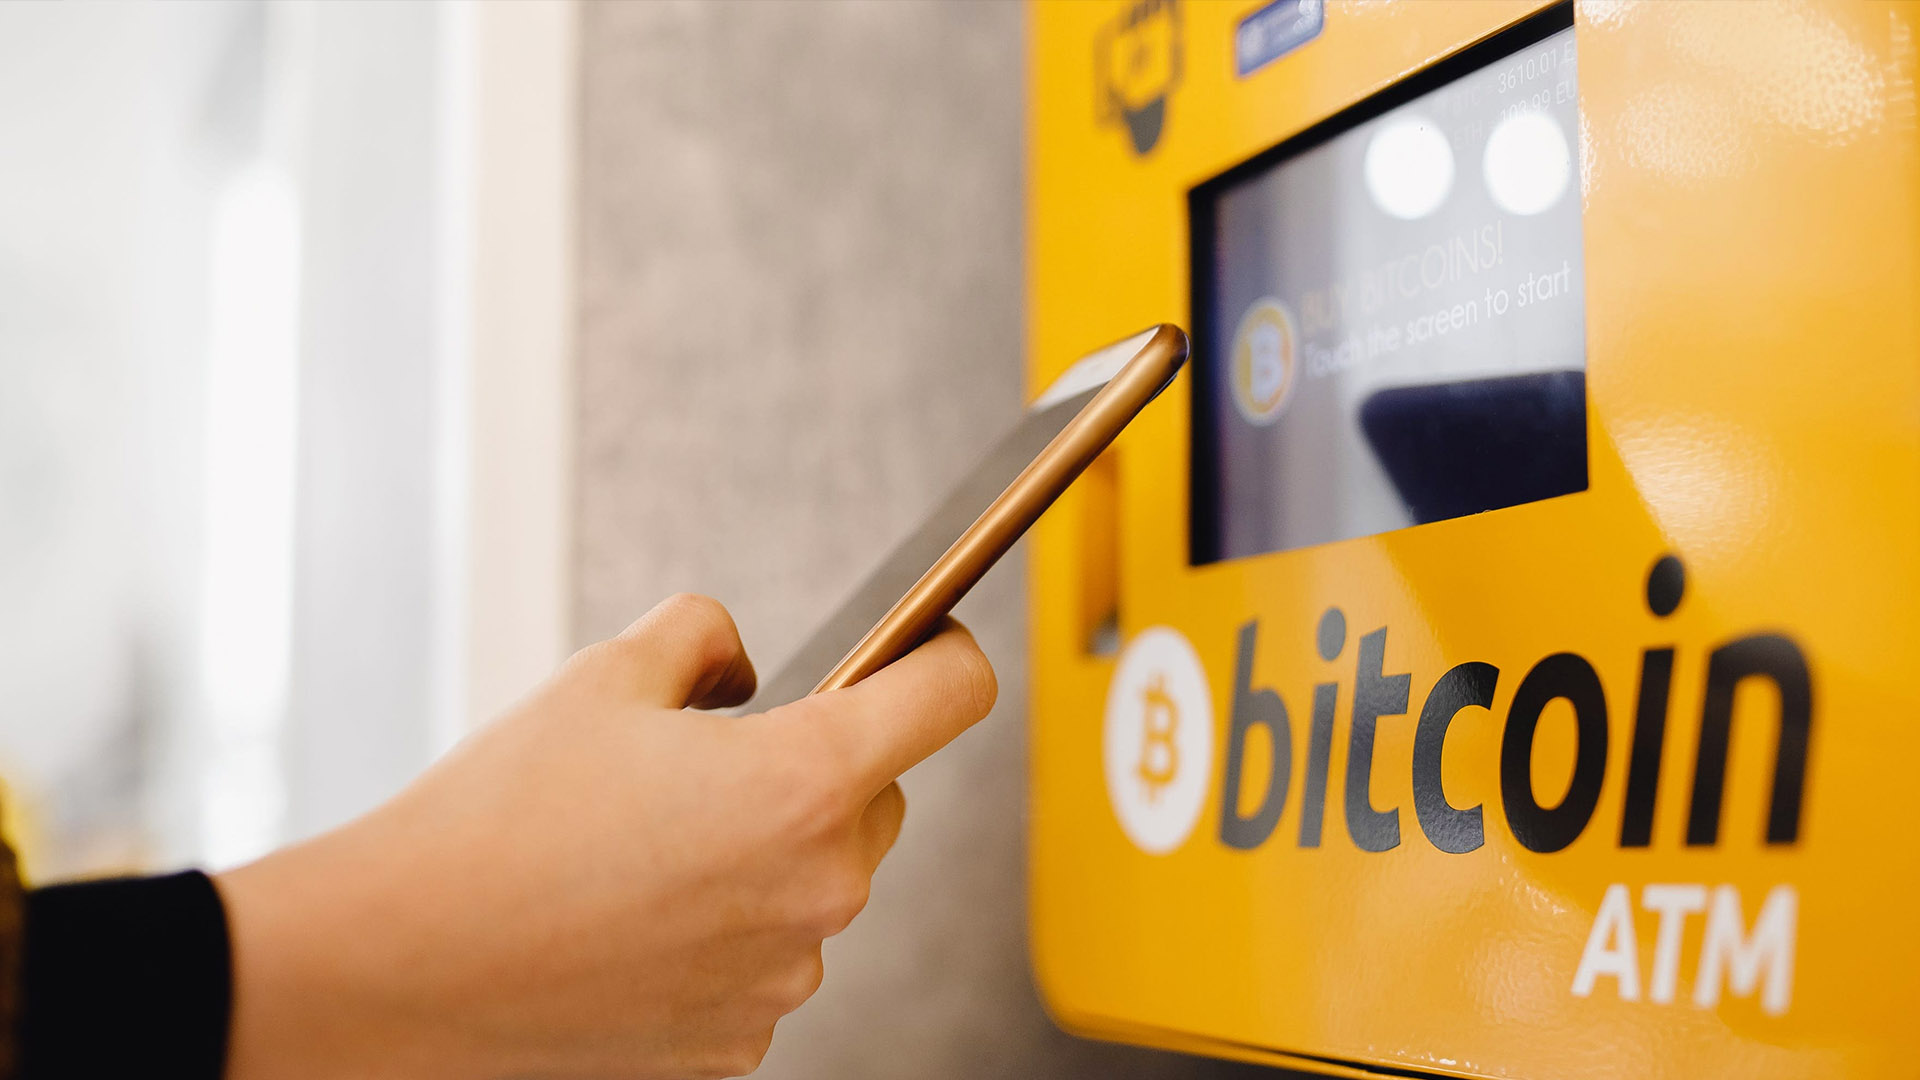 Number of Bitcoin ATMs in Panama will increase in 2022